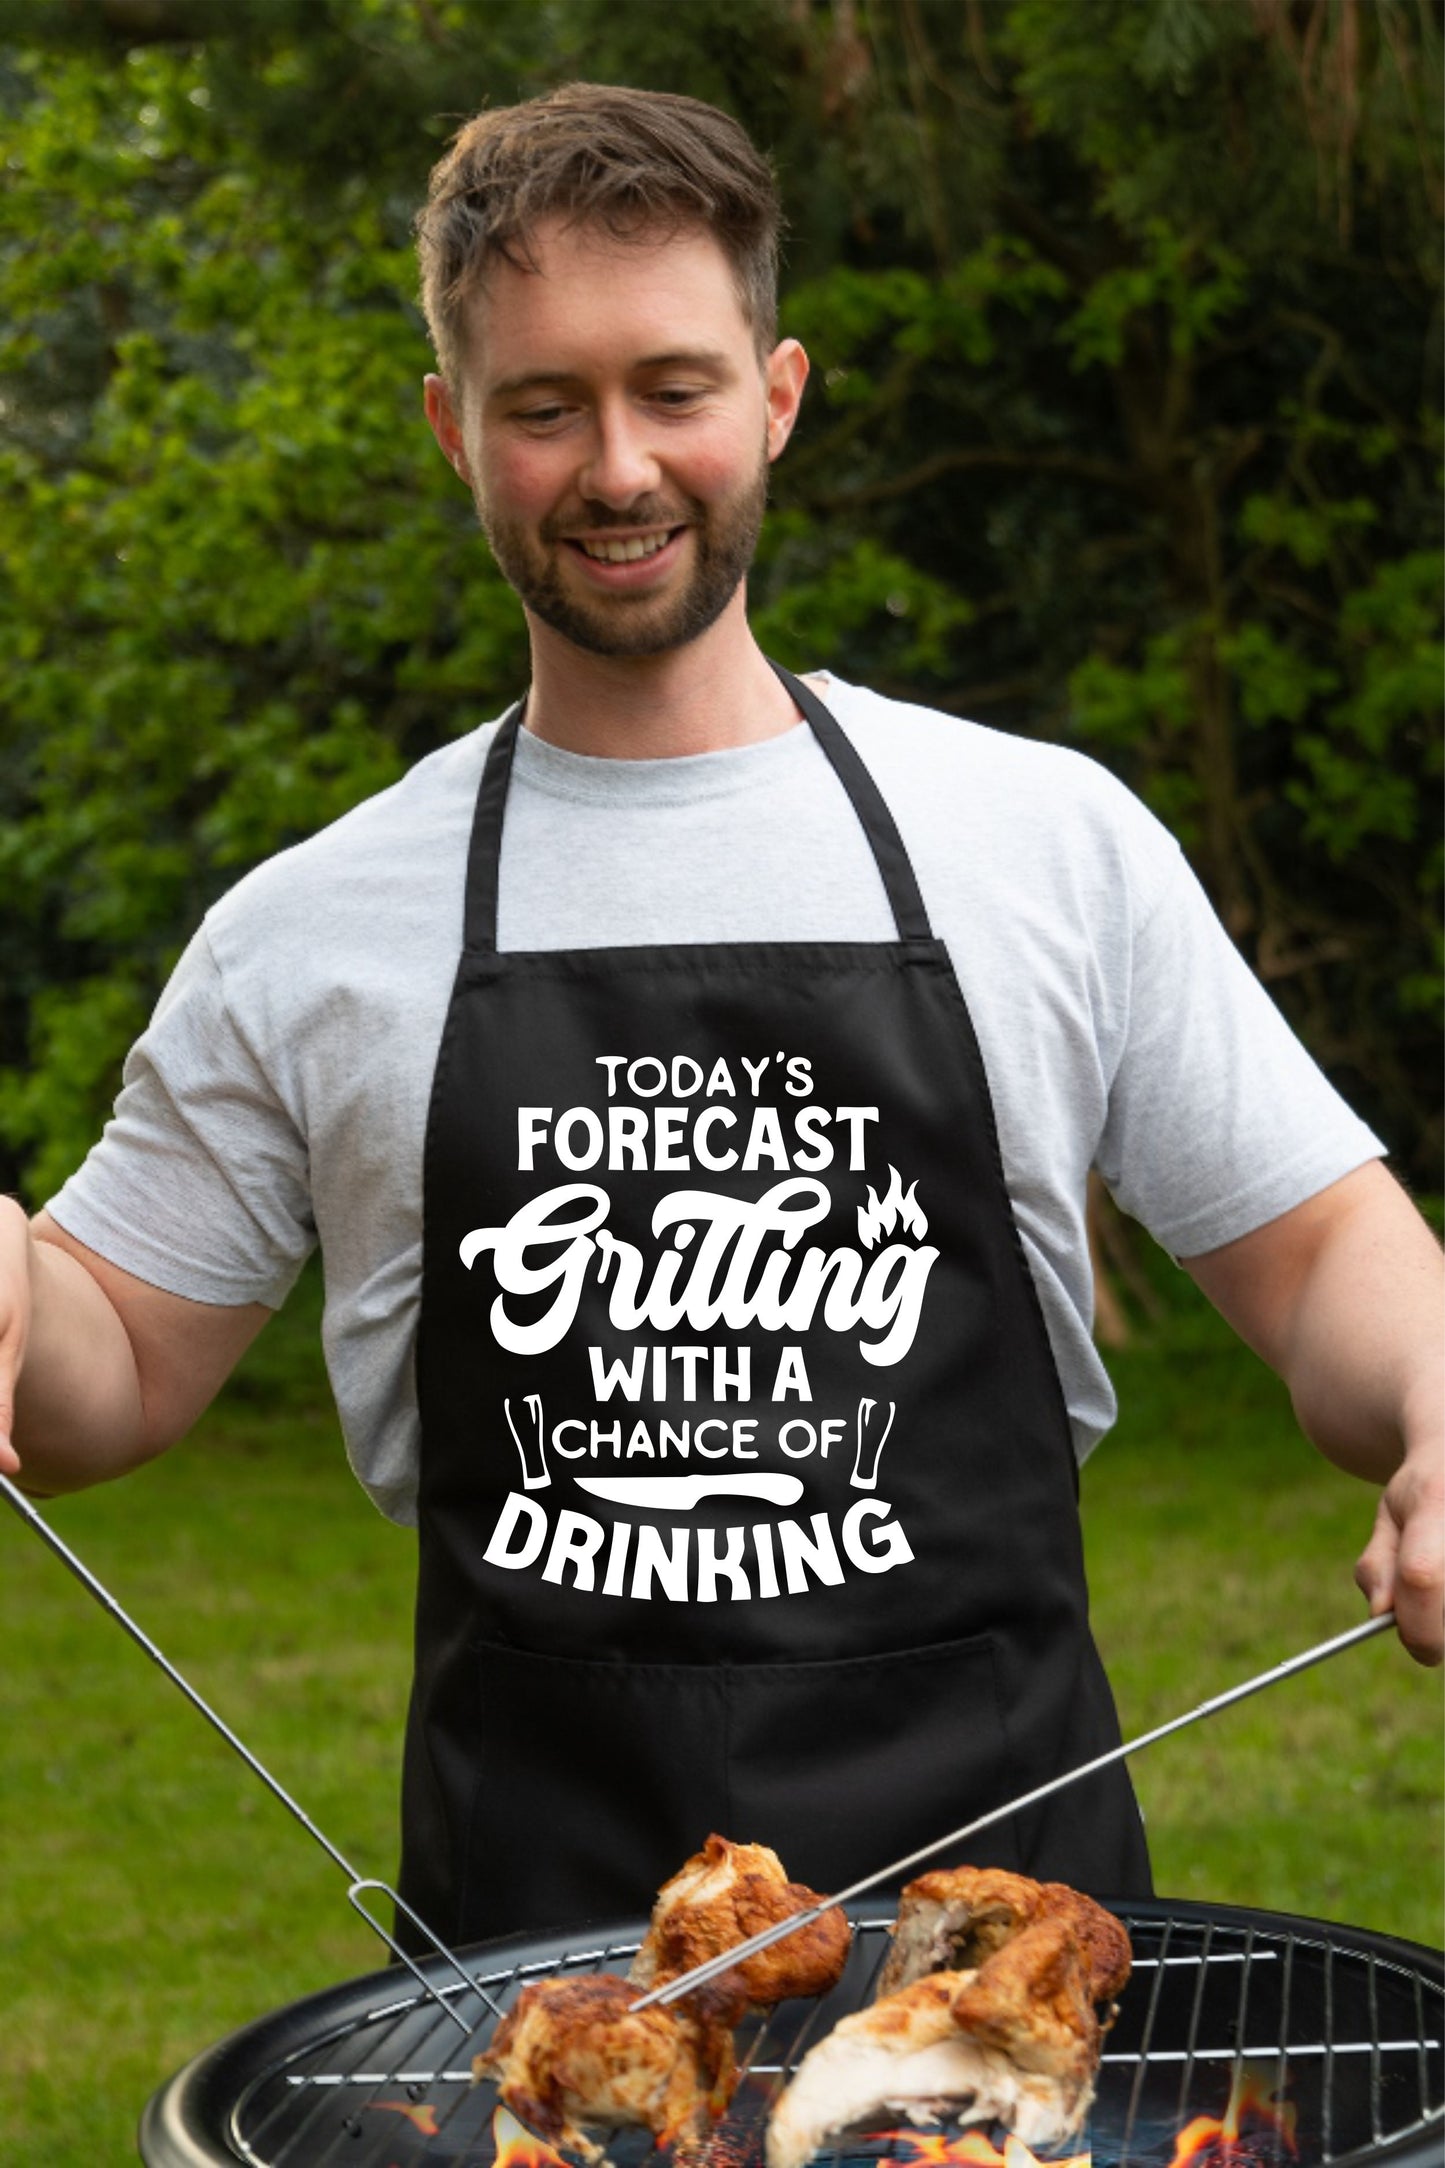 Grilling & Drinking Funny Apron Father's Day Birthday Gift Cooking Baking BBQ